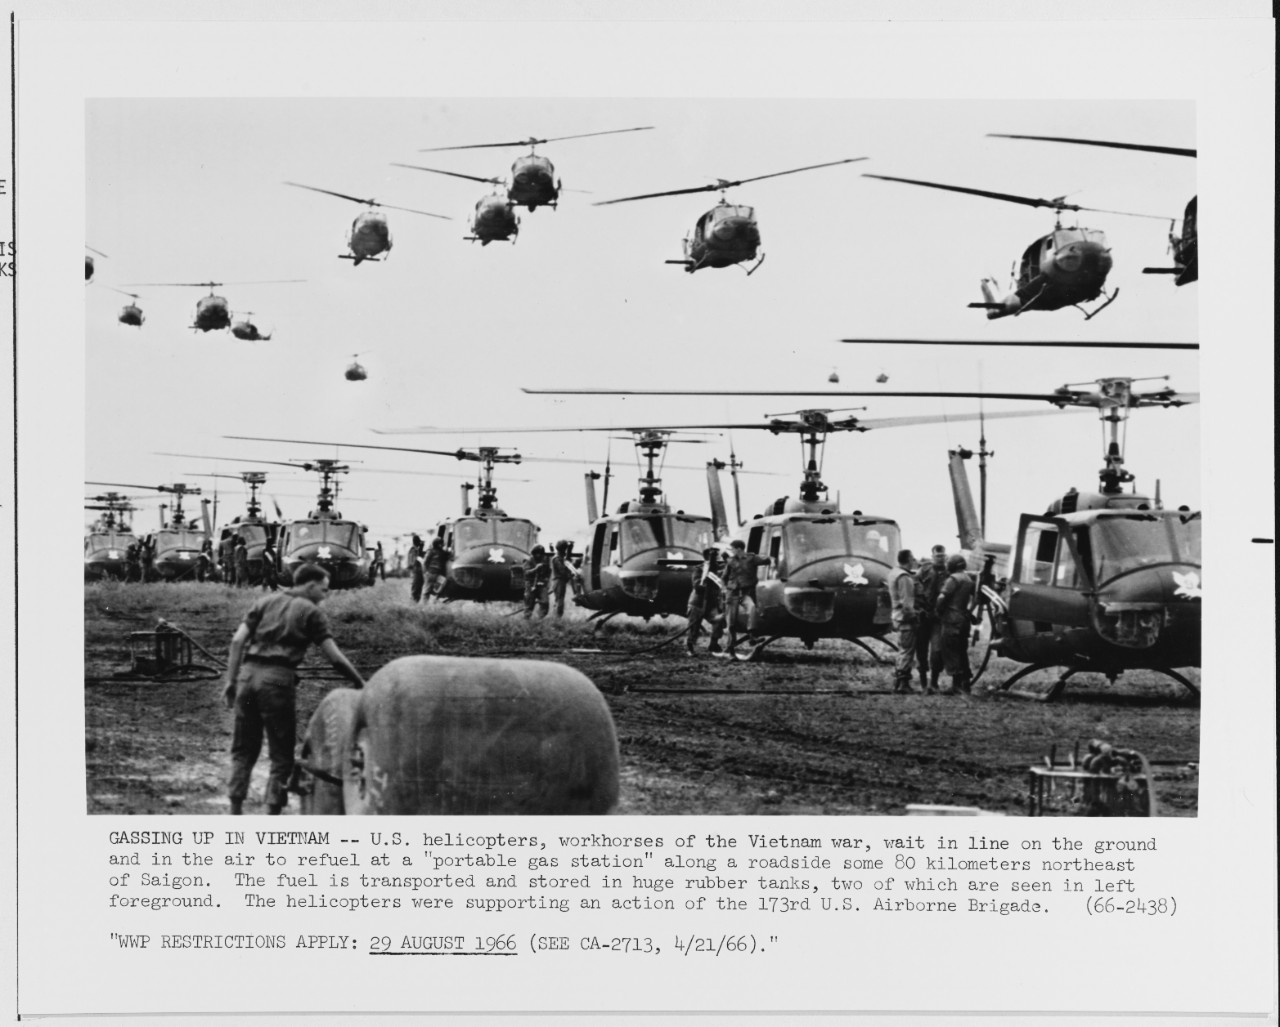 U.S. Helicopters